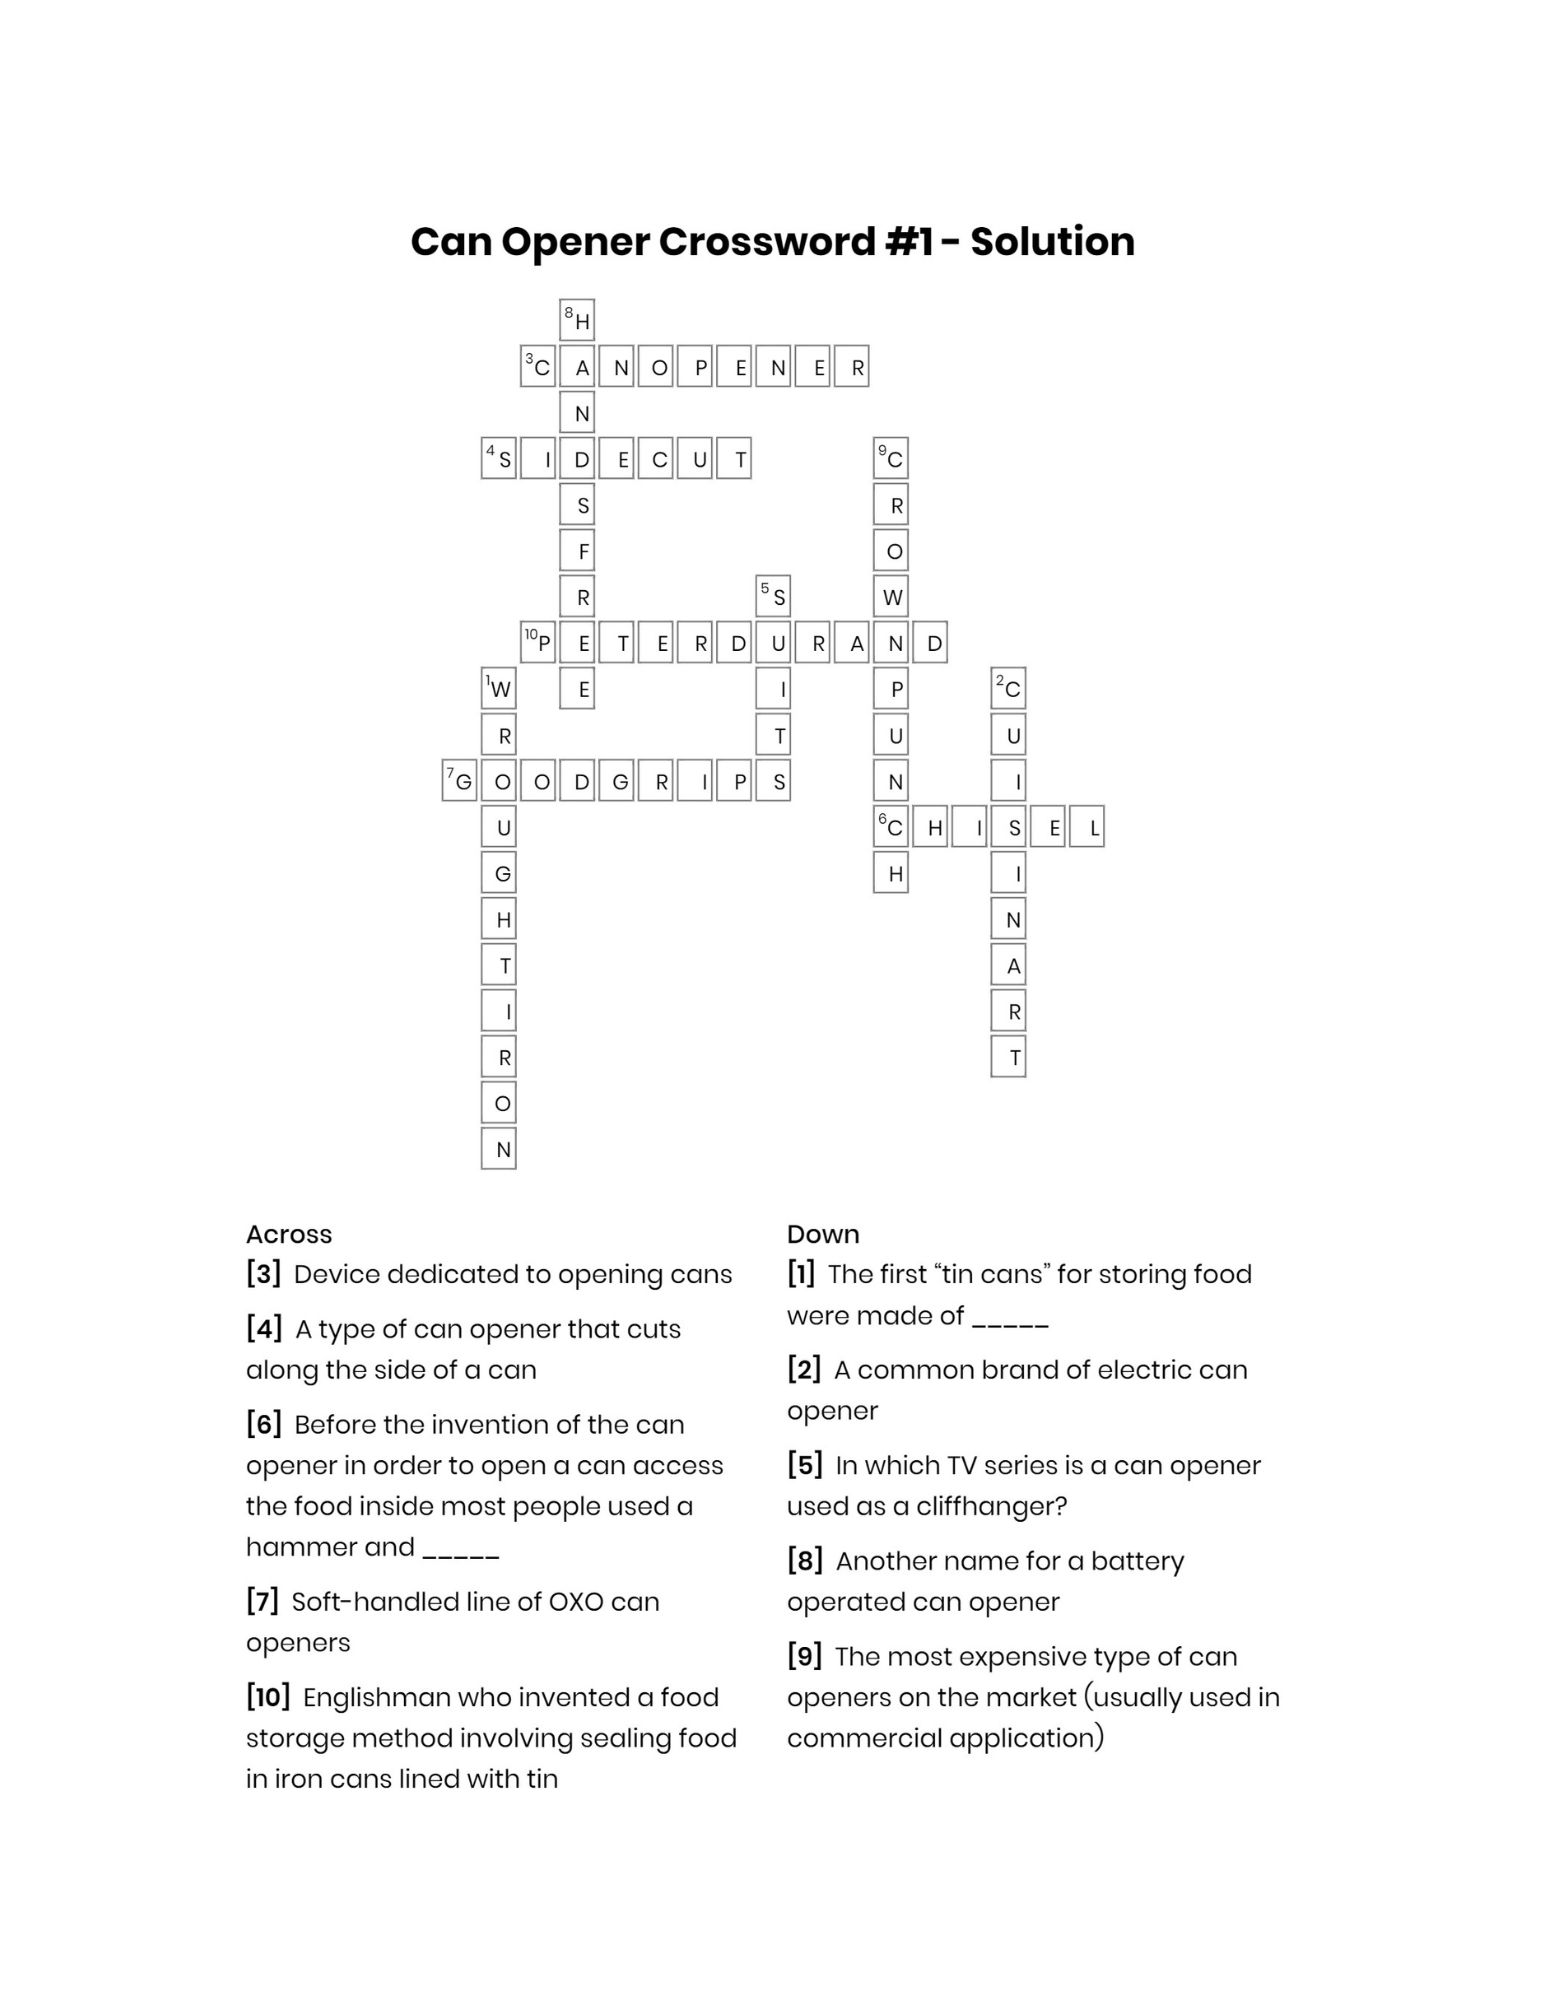 Can opener crossword puzzle answers